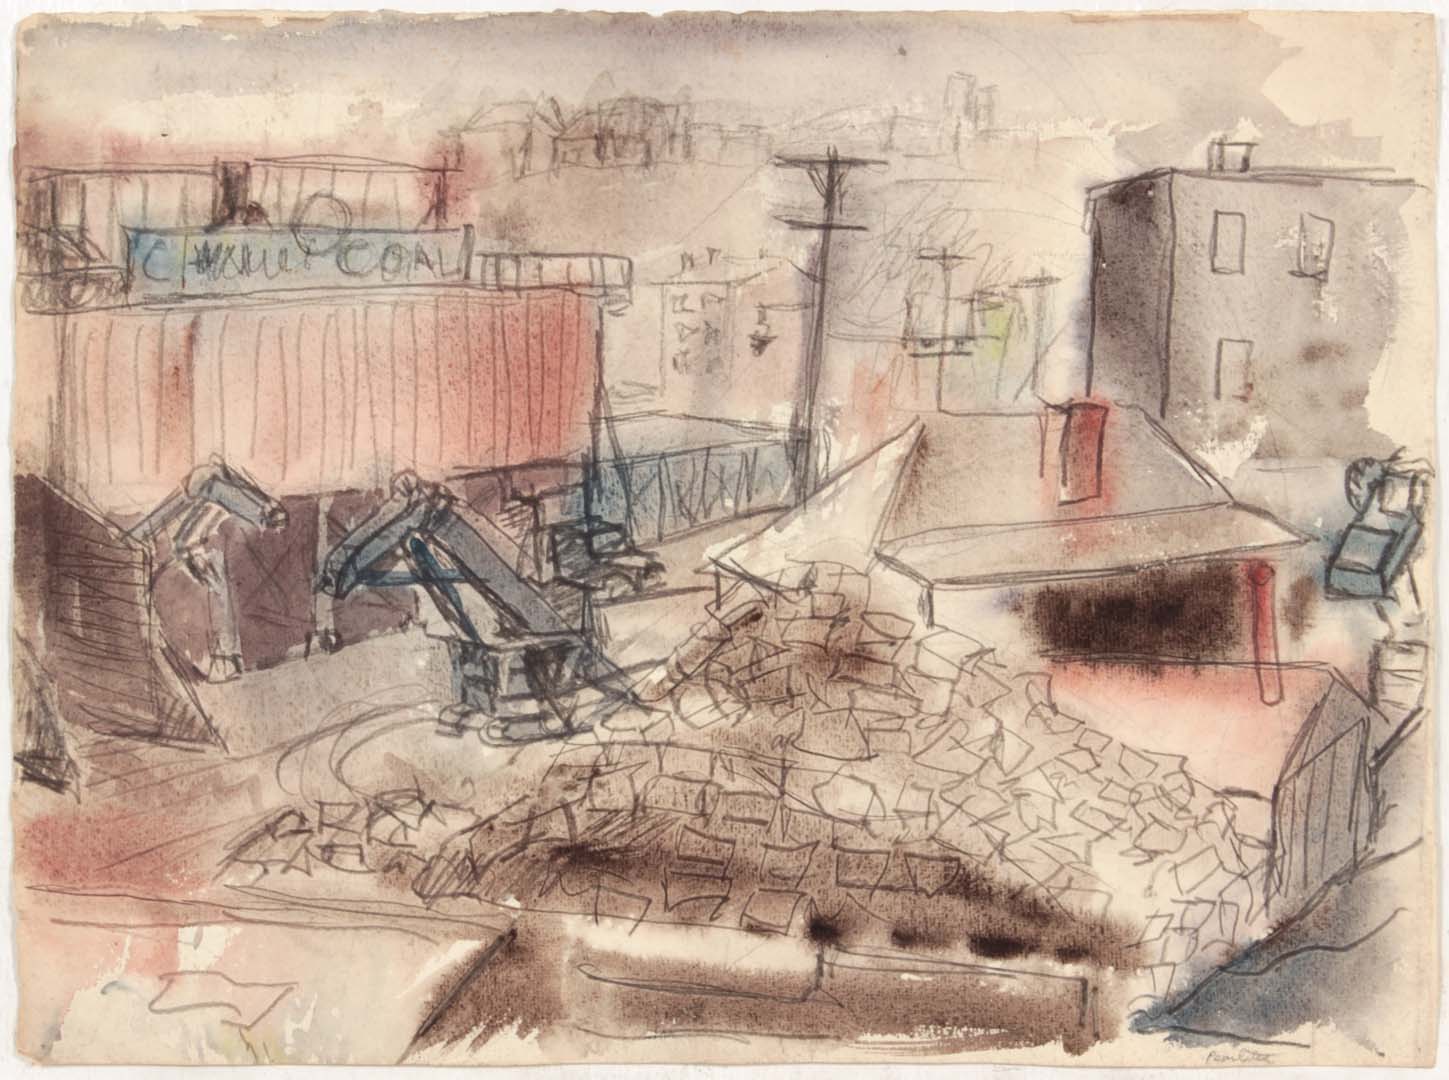 1949 NT (Pittsburgh Coal) Graphite and Wash on paper 12 x 16.25